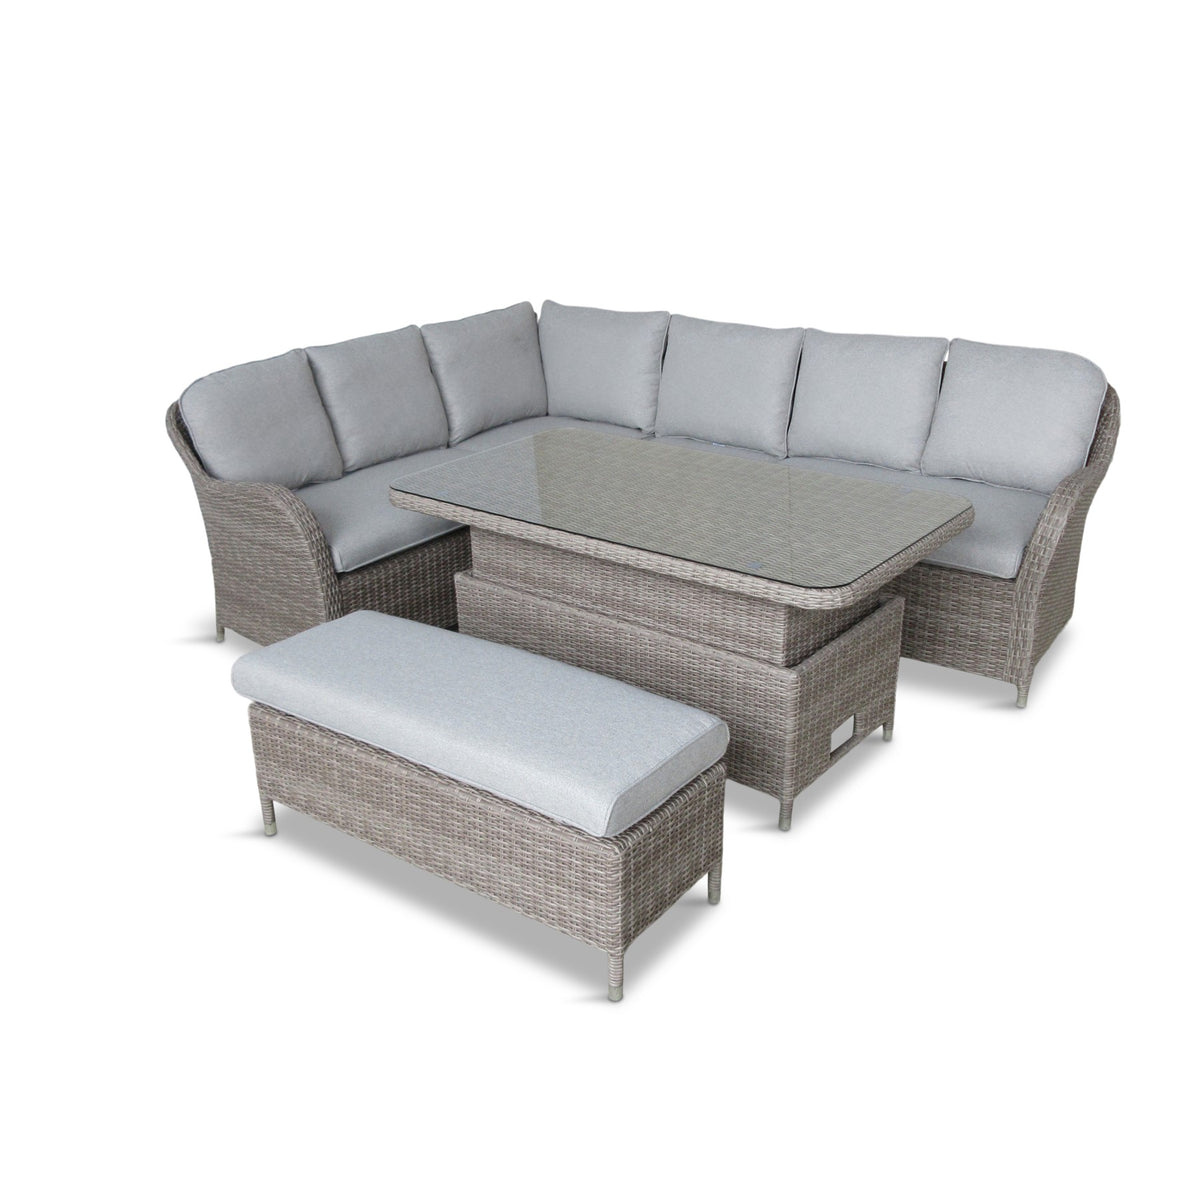 LG Monte Carlo Sand Modular Sofa Set With Height Adjustable Table and Reclining Corner